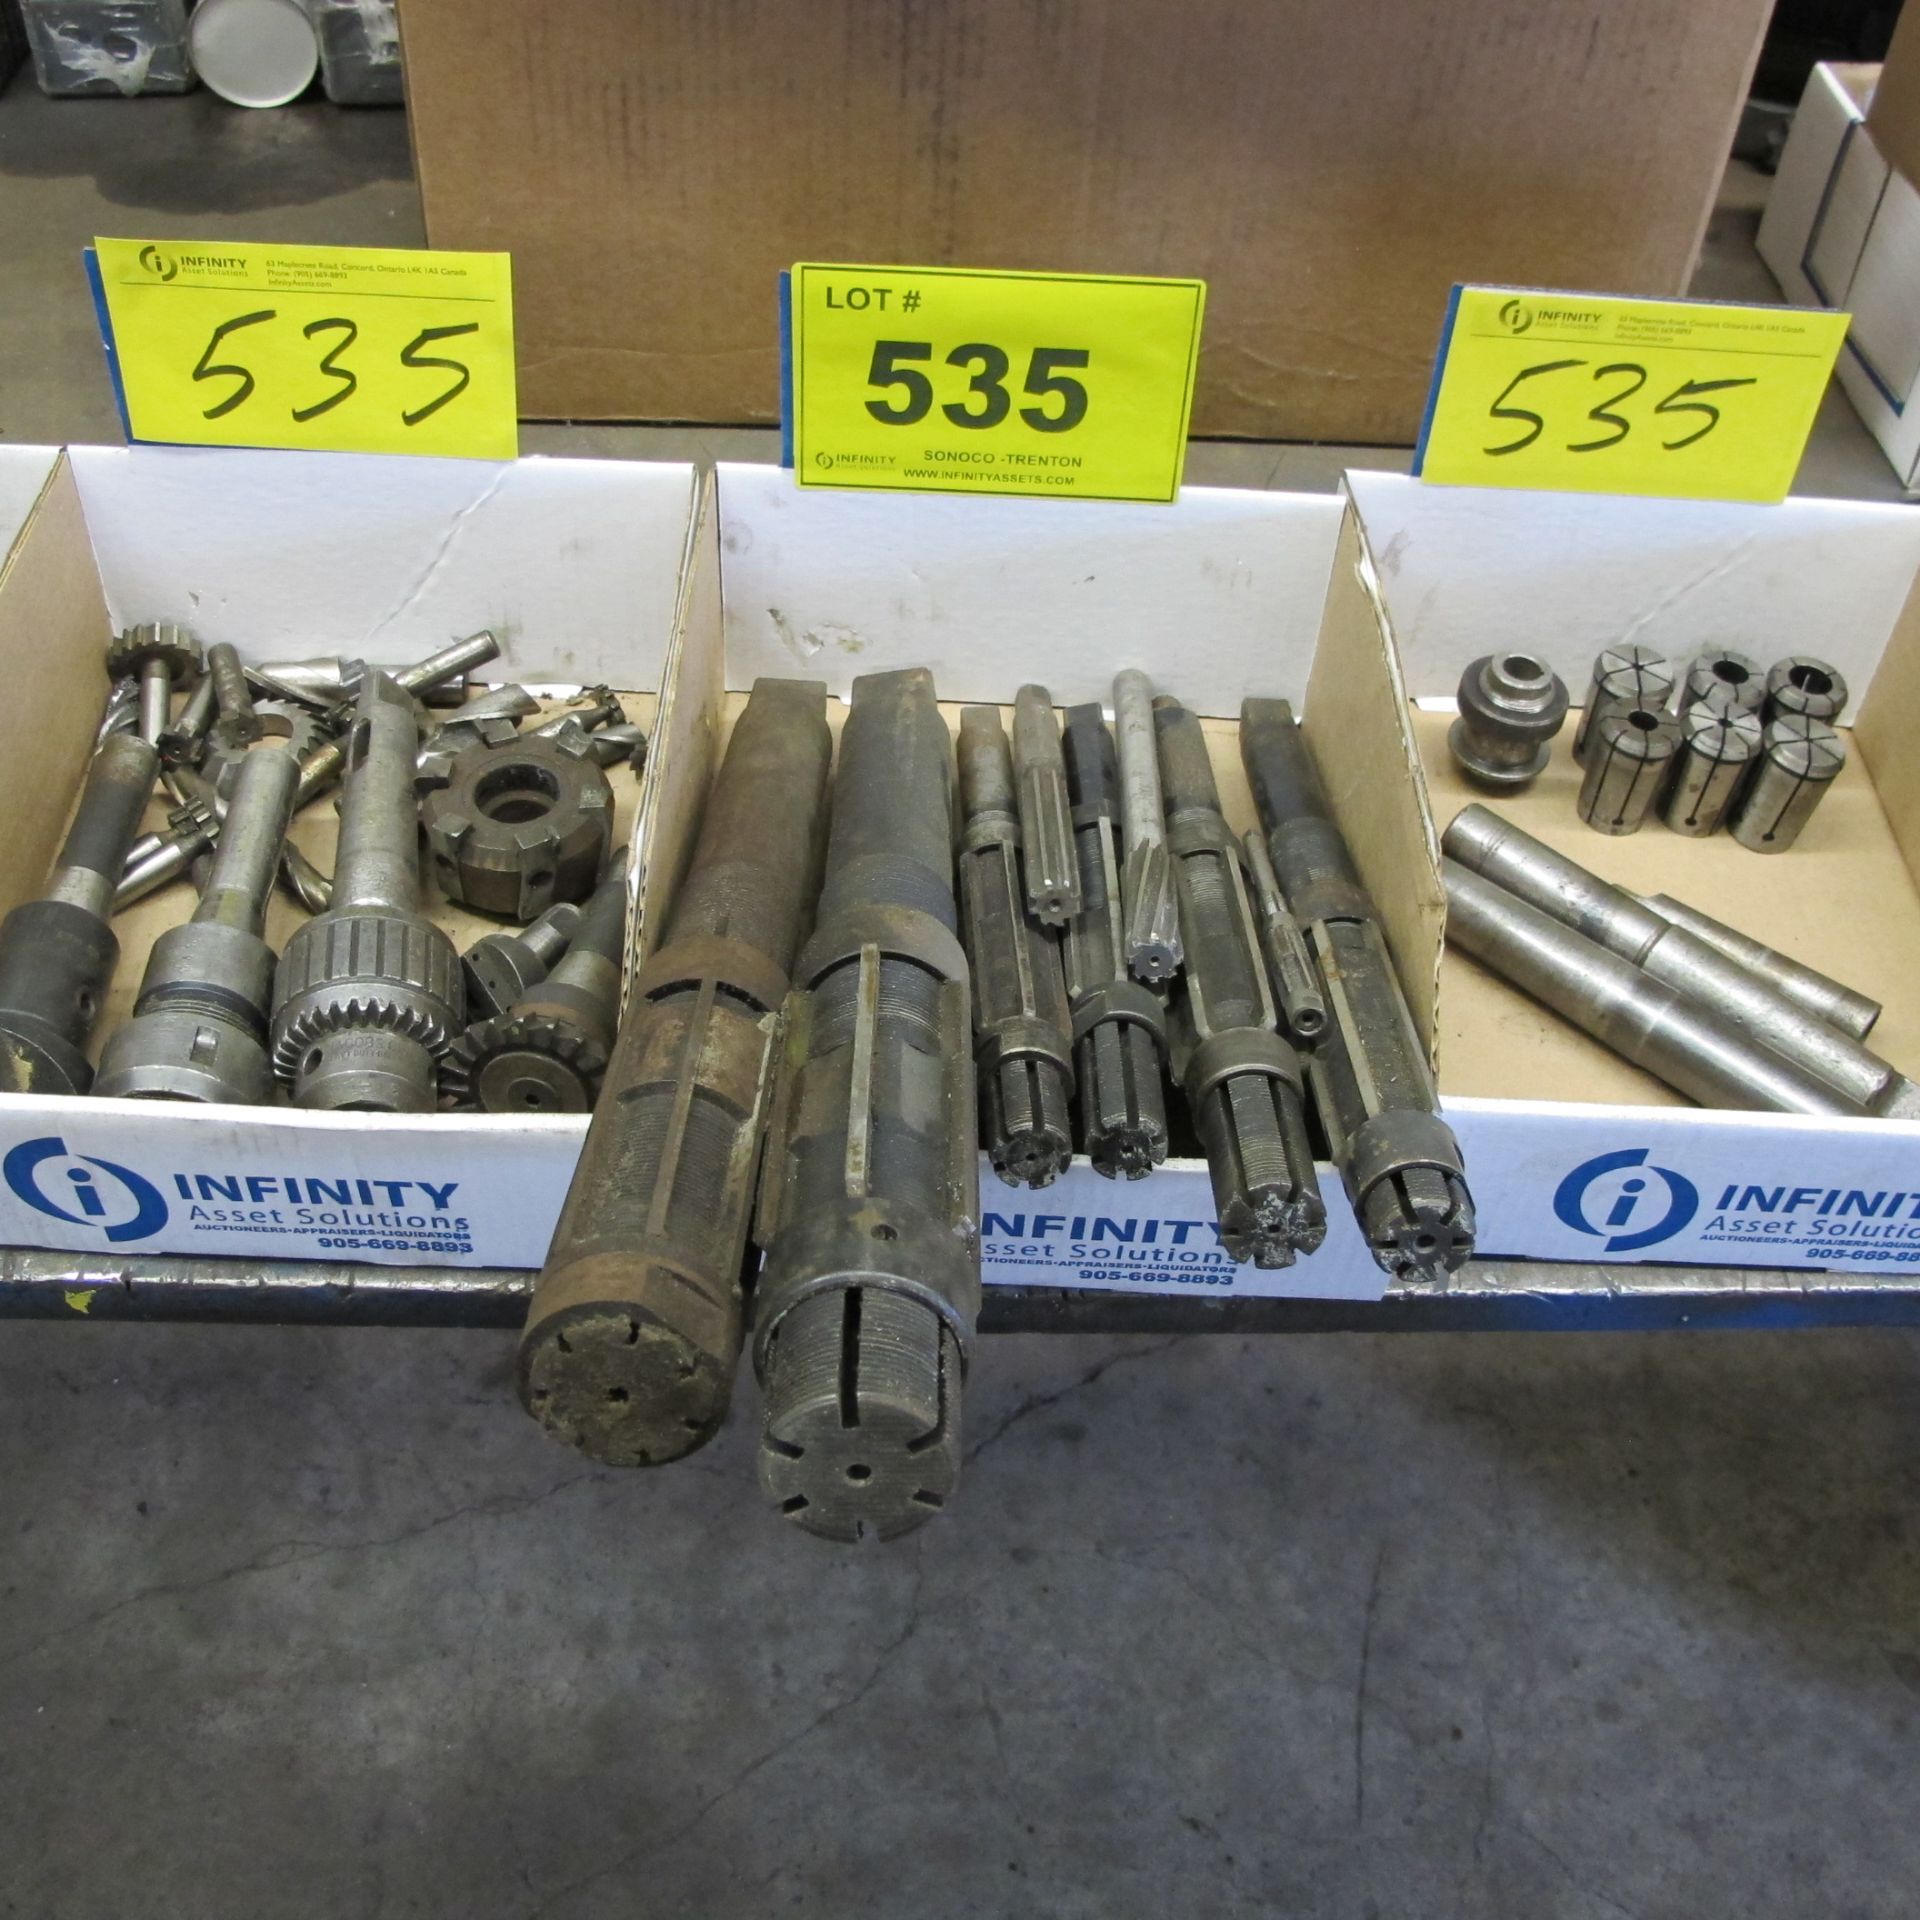 LOT OF (3) BOXES OF CHUCKS, ADJUSTABLE REAMERS, TOOL HOLDERS AND COLLETS (WEST BUILDING, MACHINE